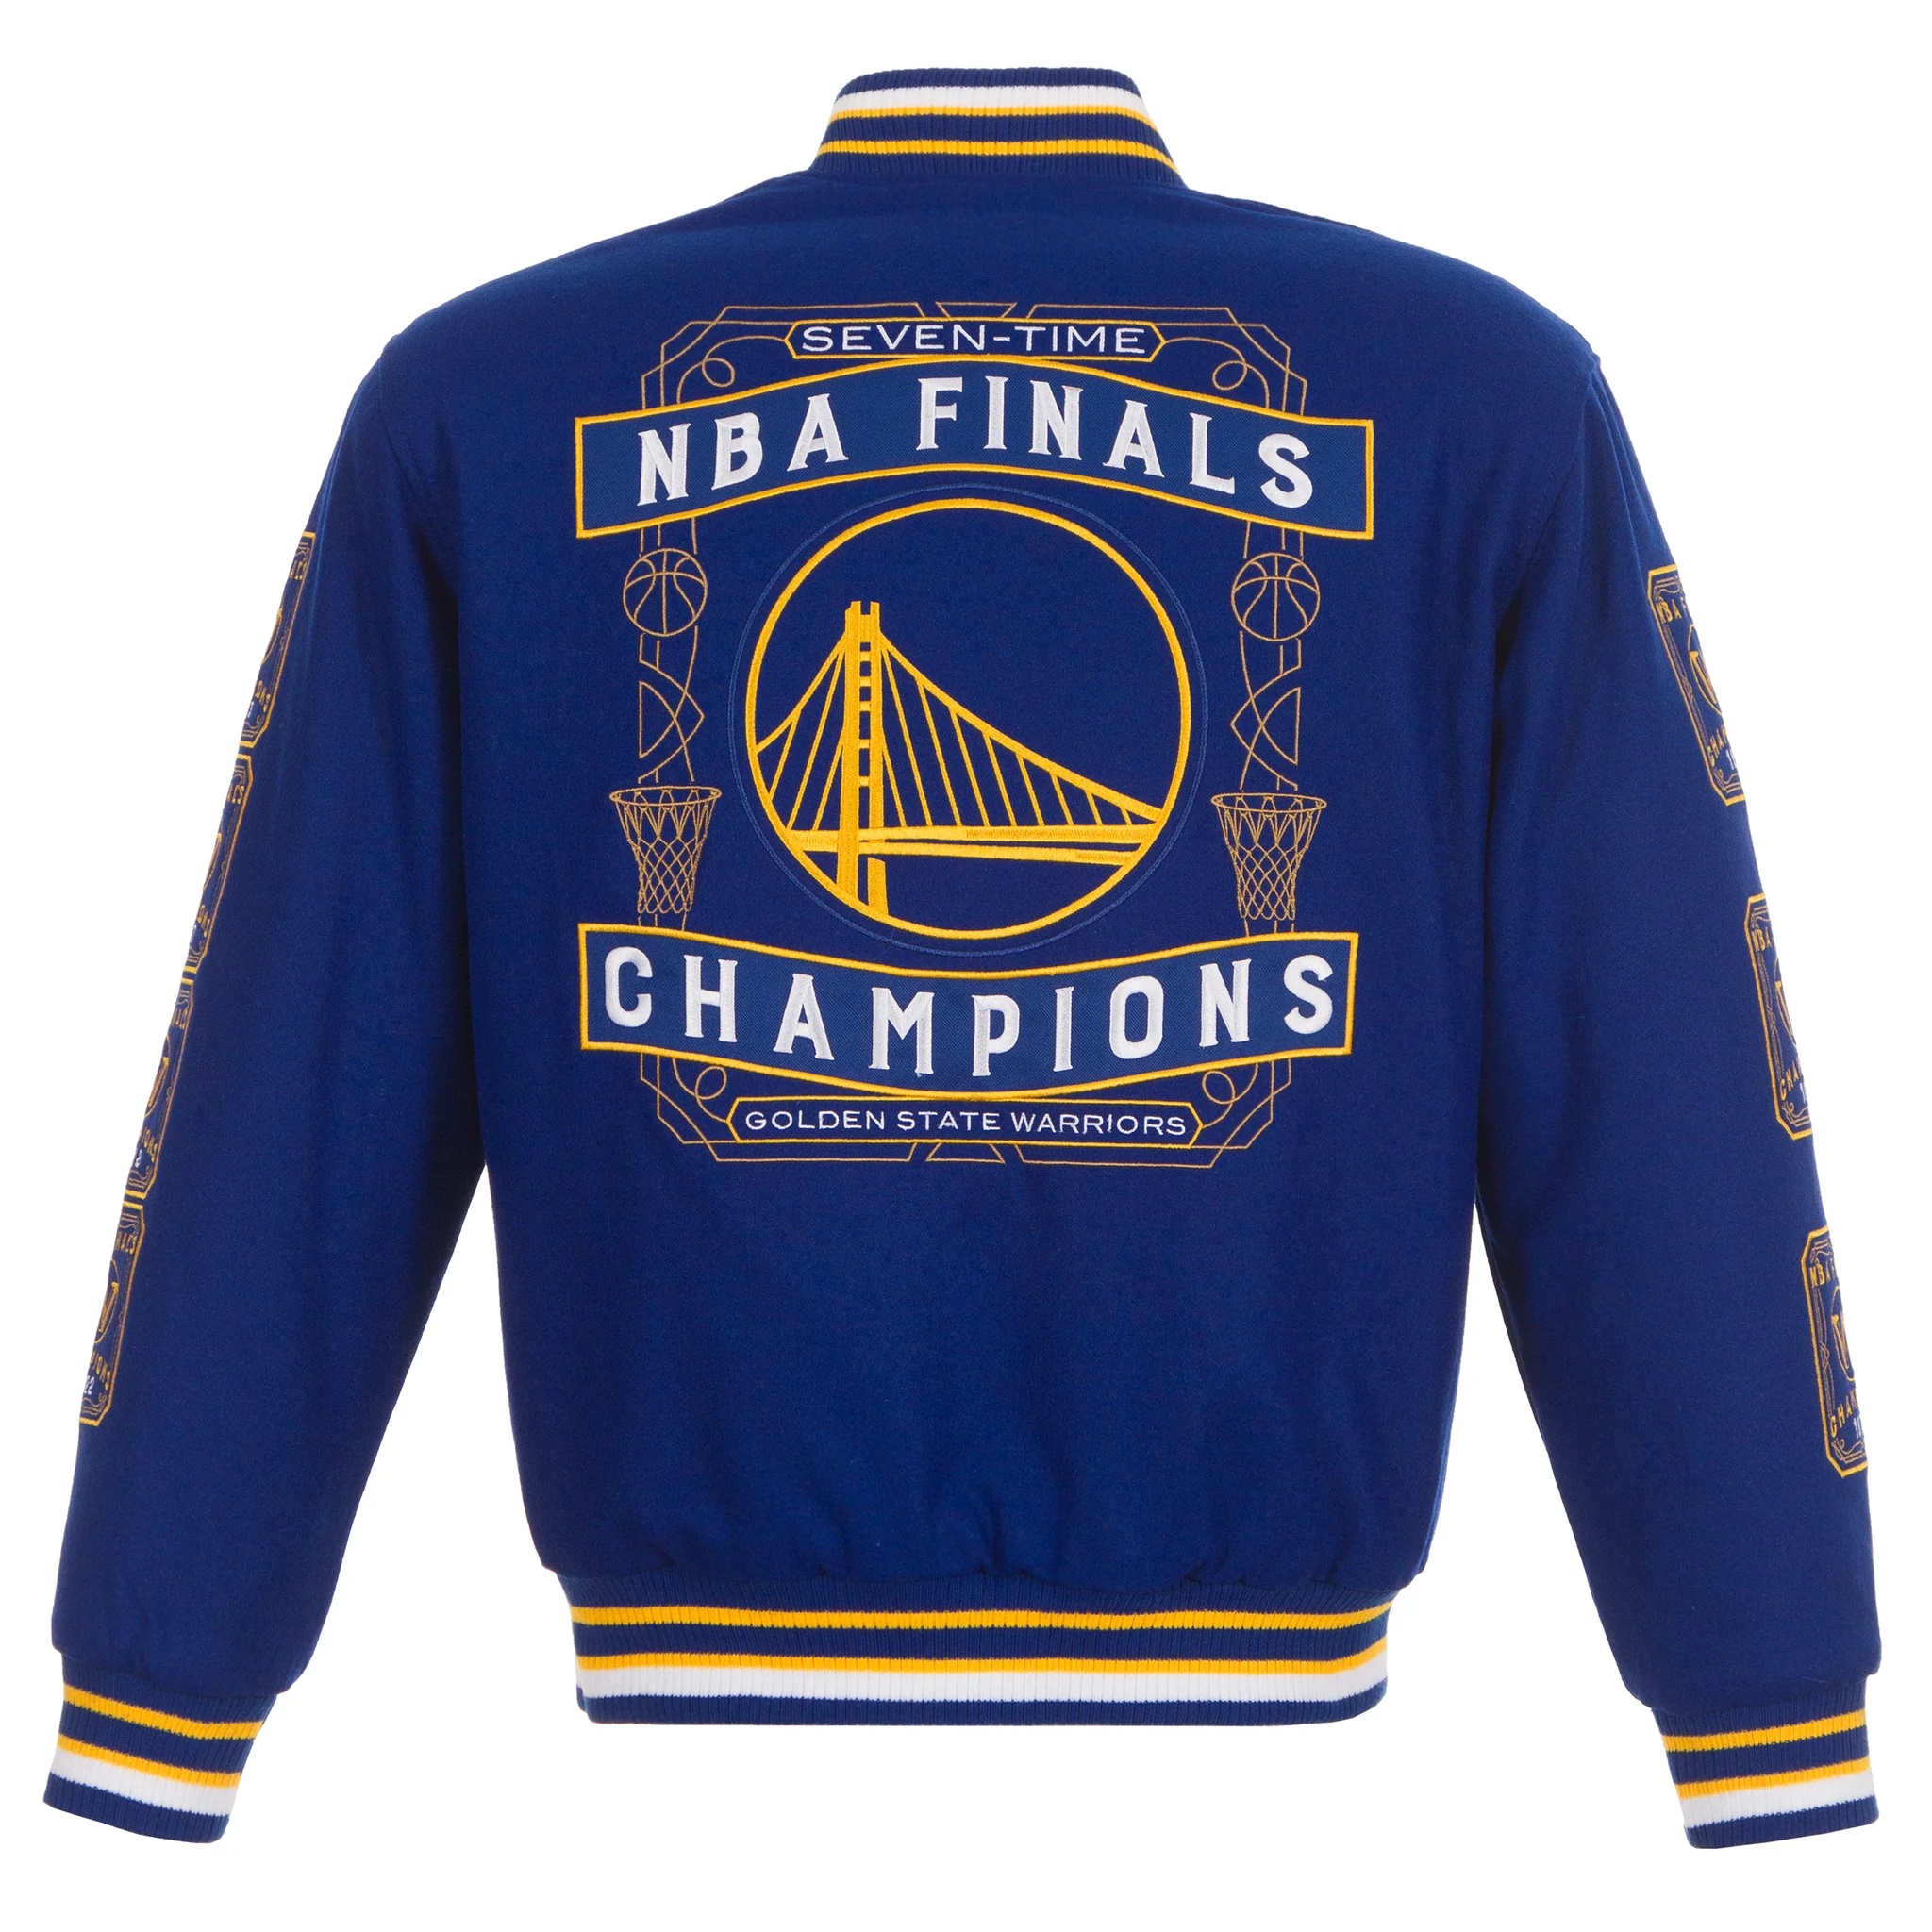 Golden State 17-Time NBA Finals Champions Jacket